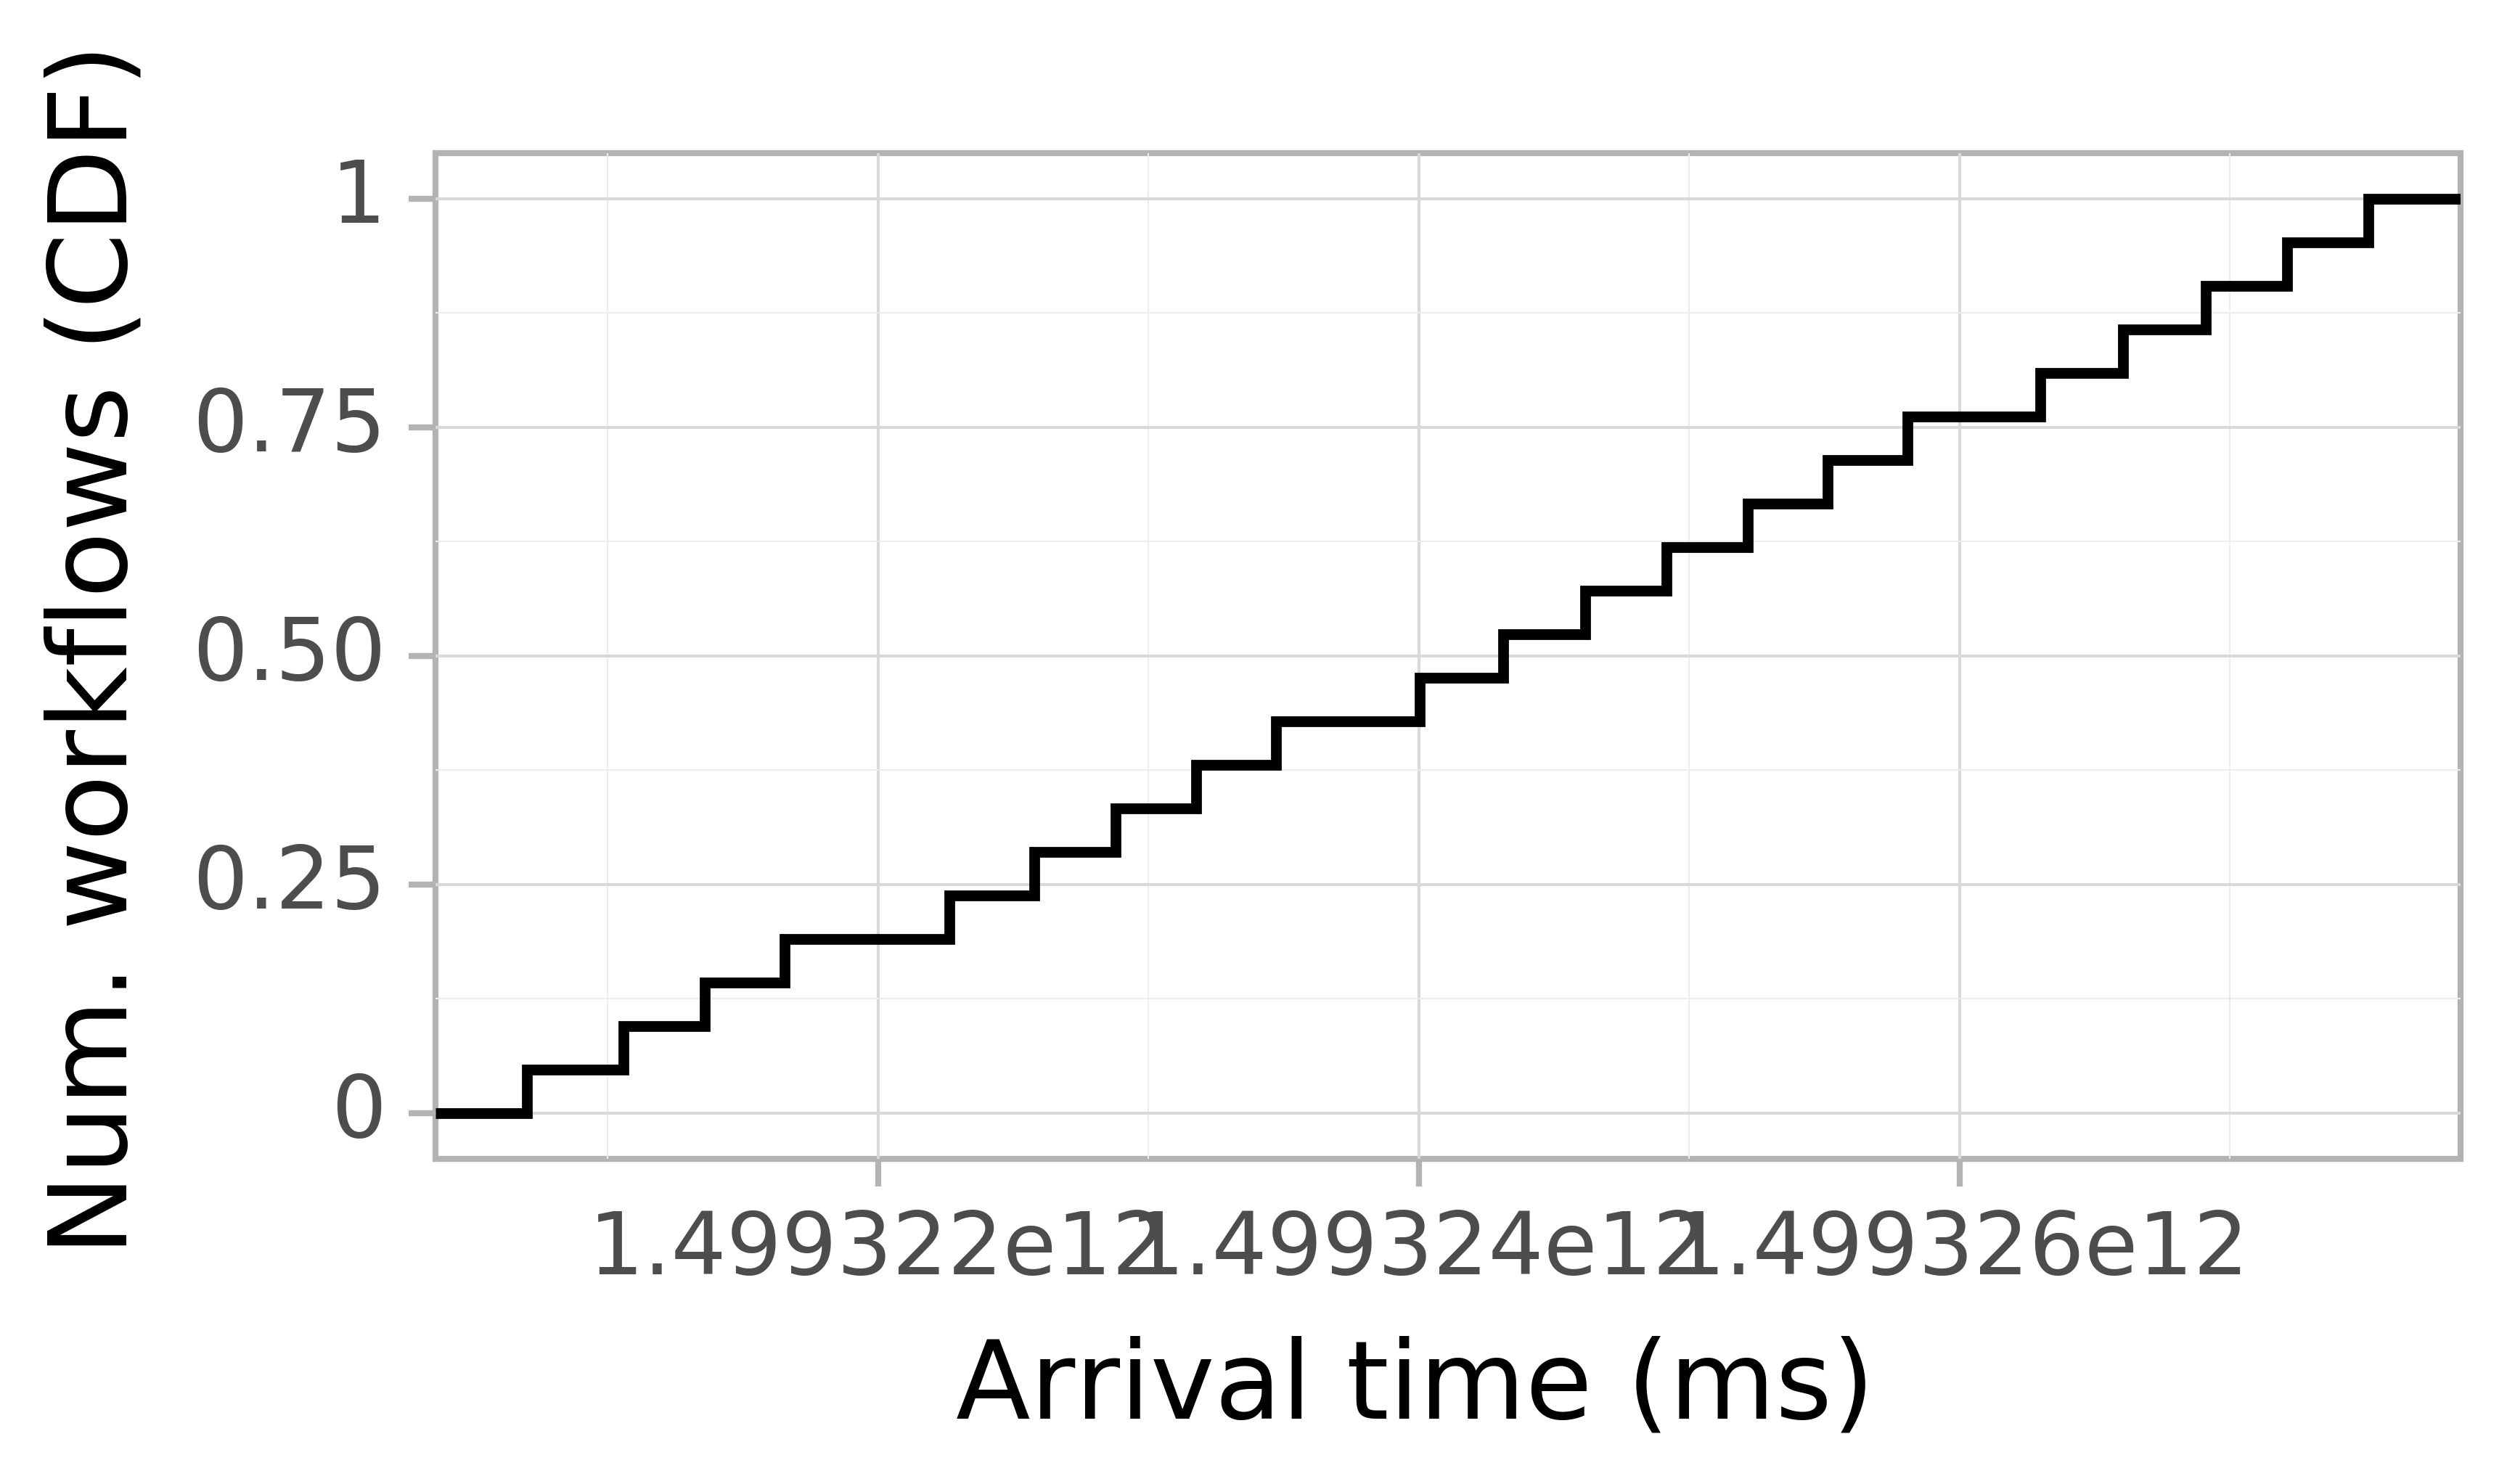 Job arrival CDF graph for the askalon-new_ee23 trace.